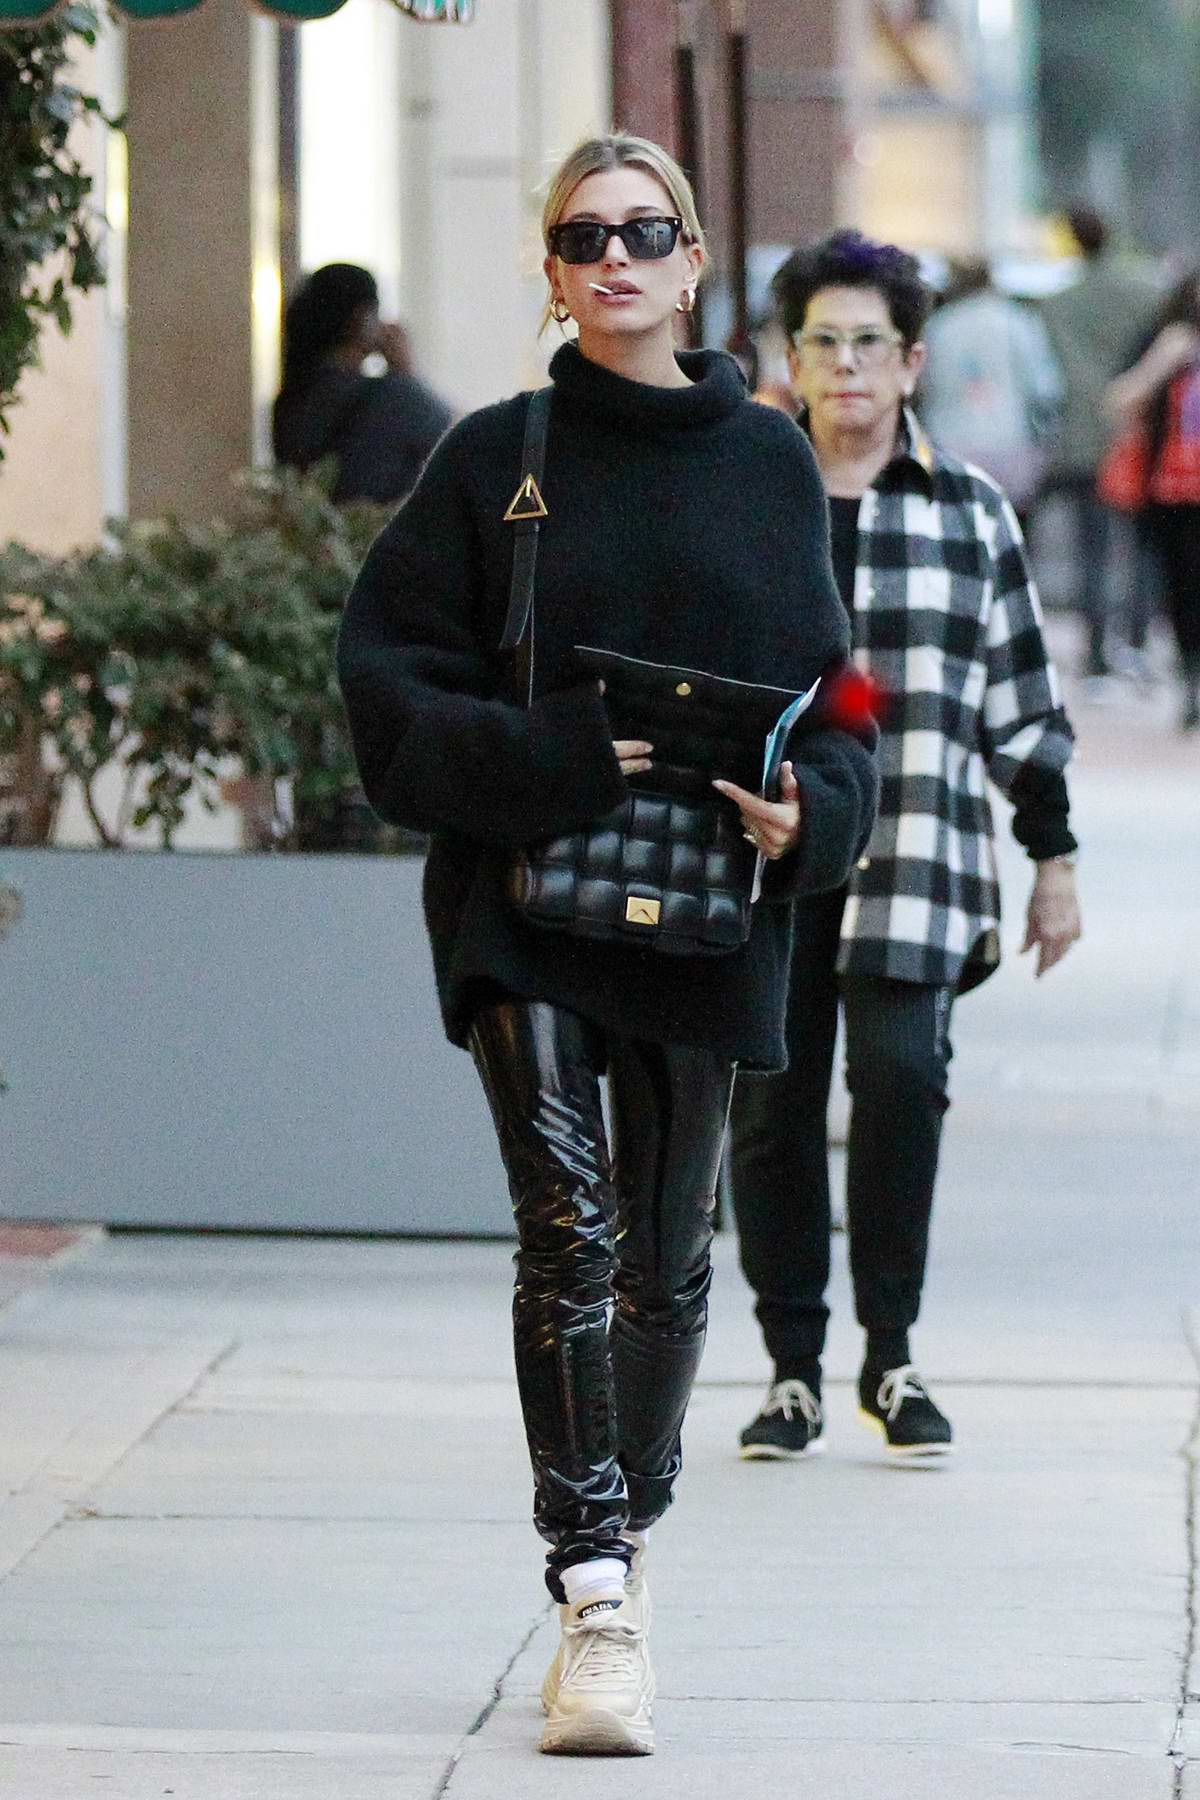 Lucy Hale shows off her curves in brown leggings while stopping